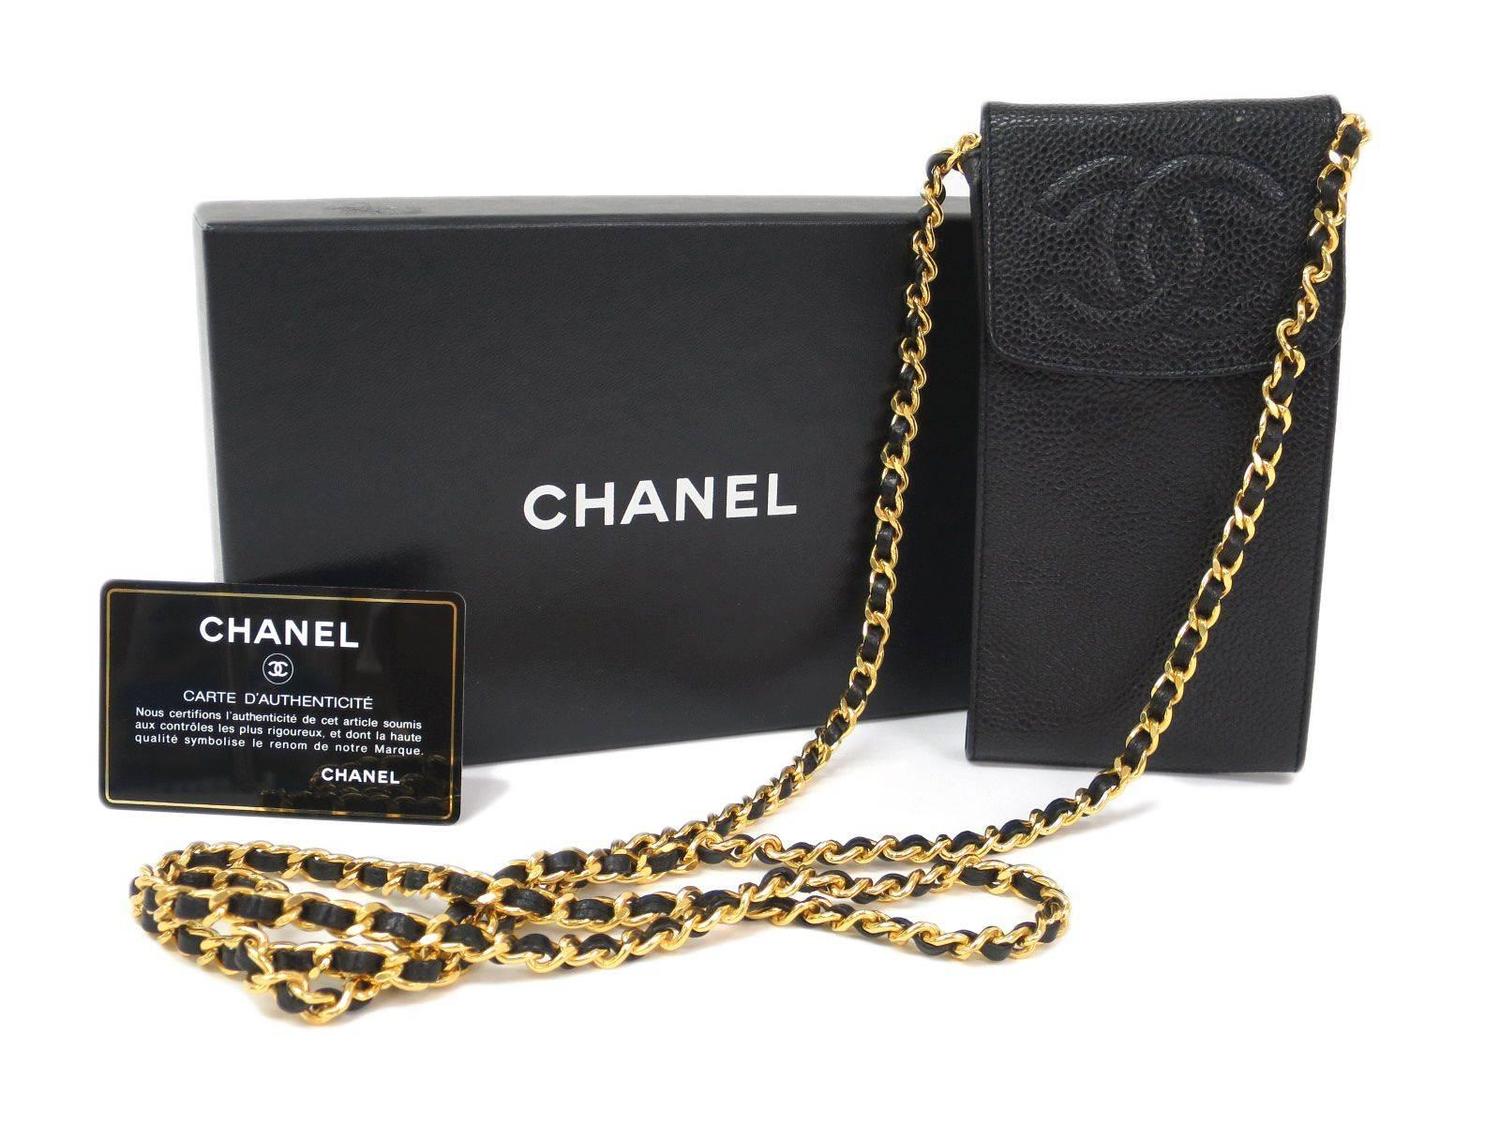 Chanel Black Caviar Leather Gold Mini Cell Phone Crossbody Shoulder Bag in Box For Sale at 1stdibs